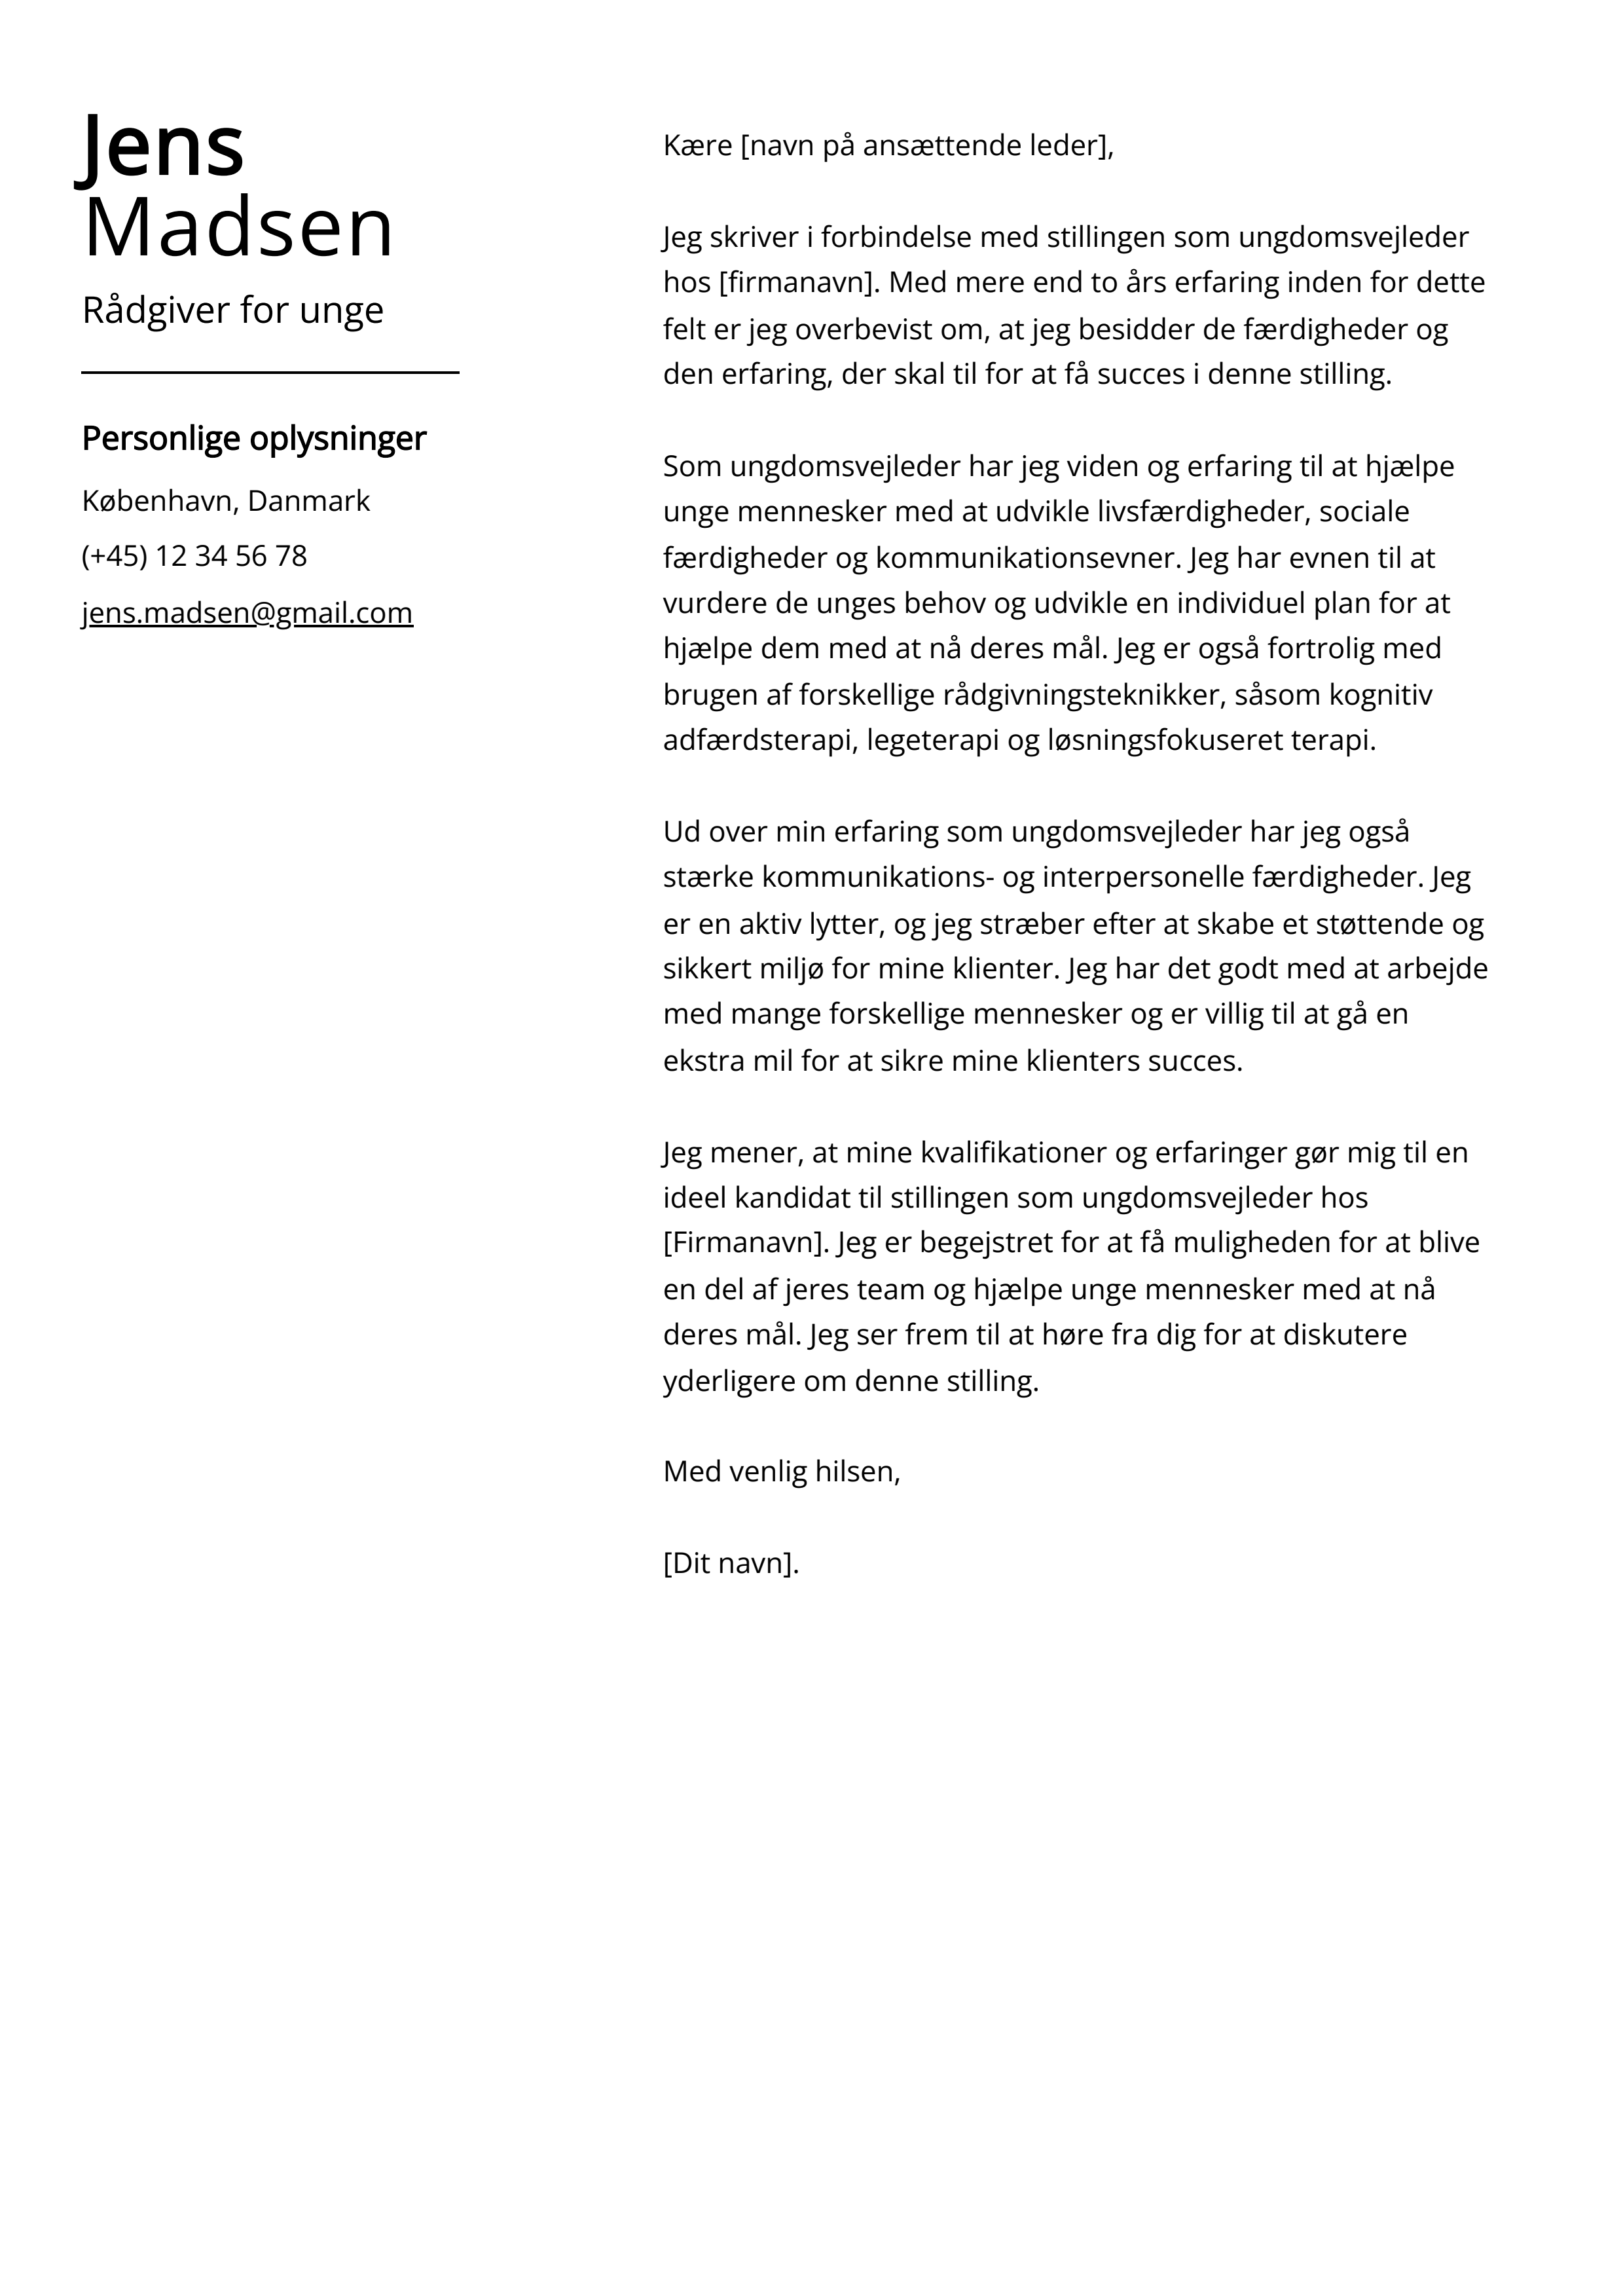 Rådgiver for unge Cover Letter Example